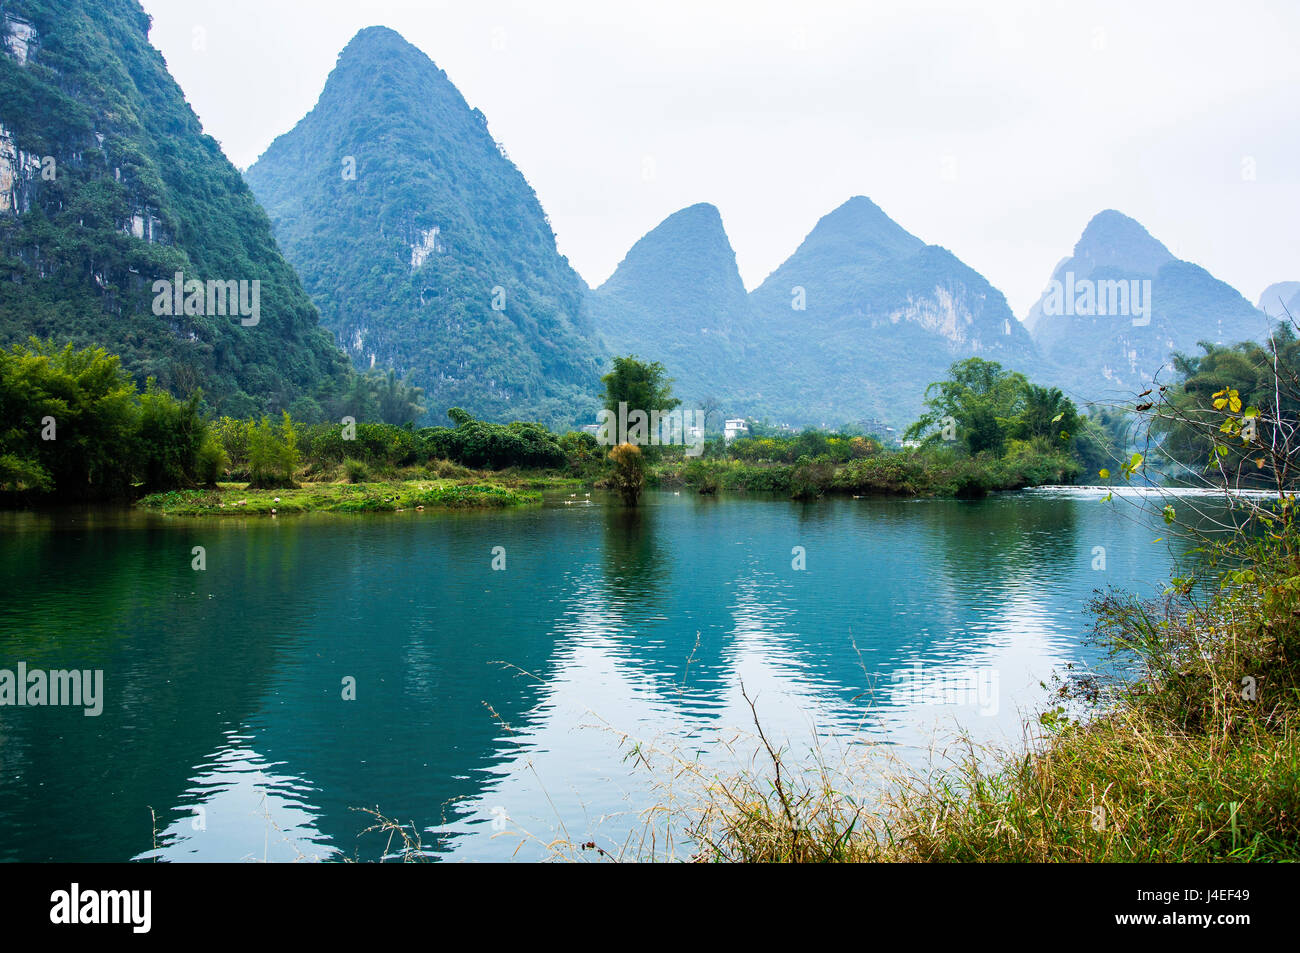 Beautiful river and mountains scenery Stock Photo